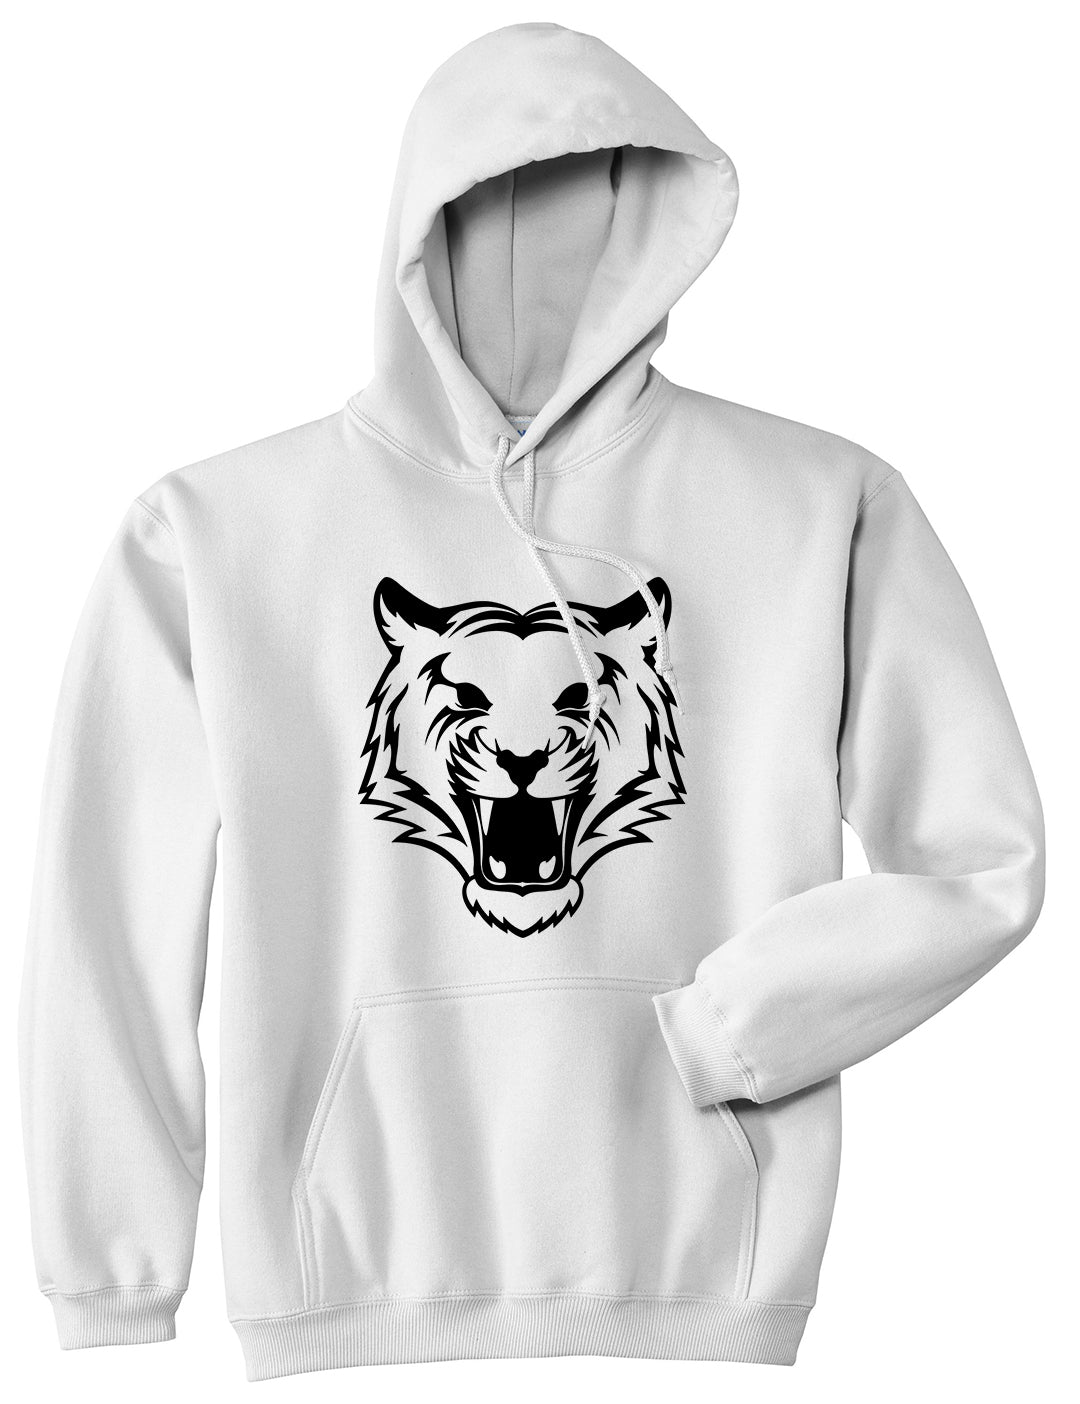 Tiger Face Outline Mens Pullover Hoodie White